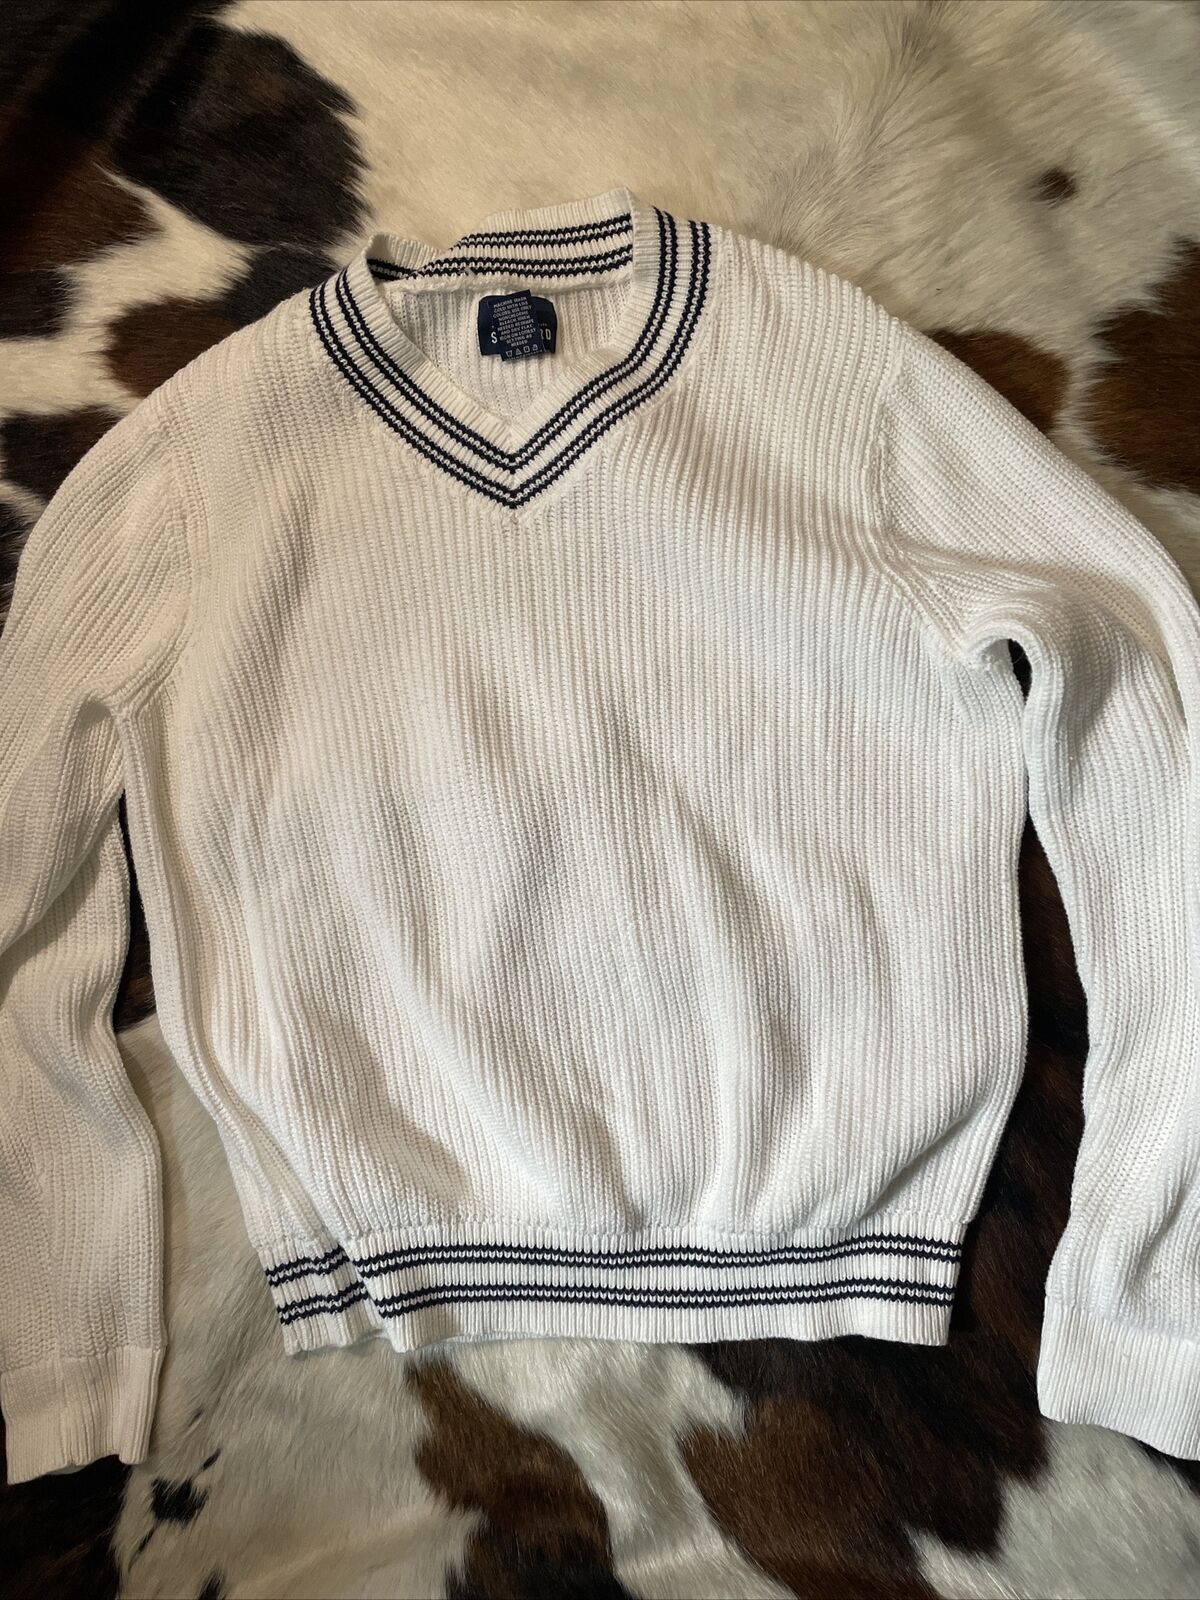 Vintage Stafford V-Neck Cable Knit Sweater White … - image 1